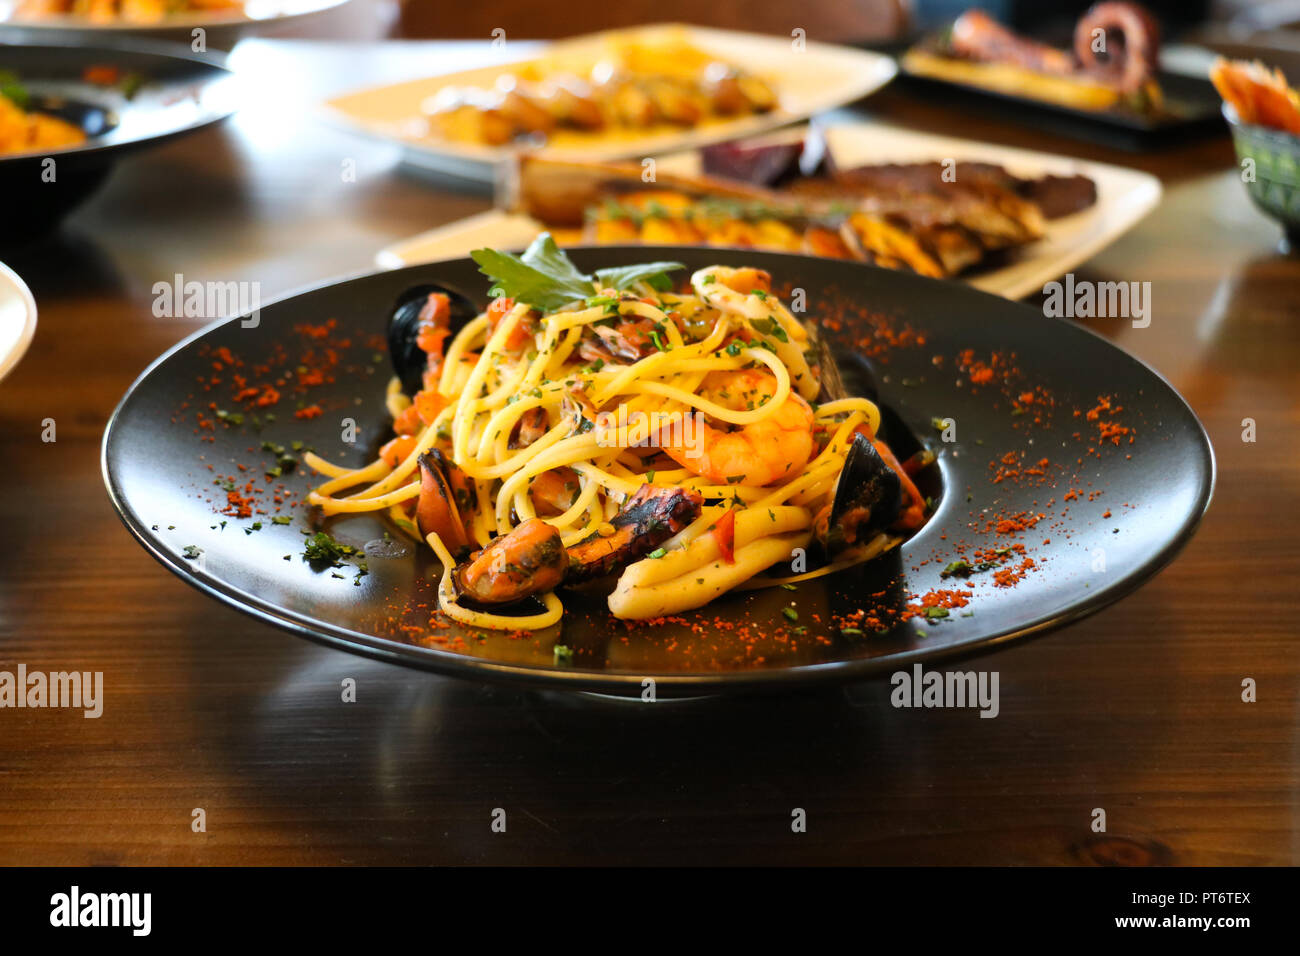 Healthy food concept. Spaghetti with shrimps, prawns, mussels and parsley on black plate. Blur plates with foods background. Stock Photo